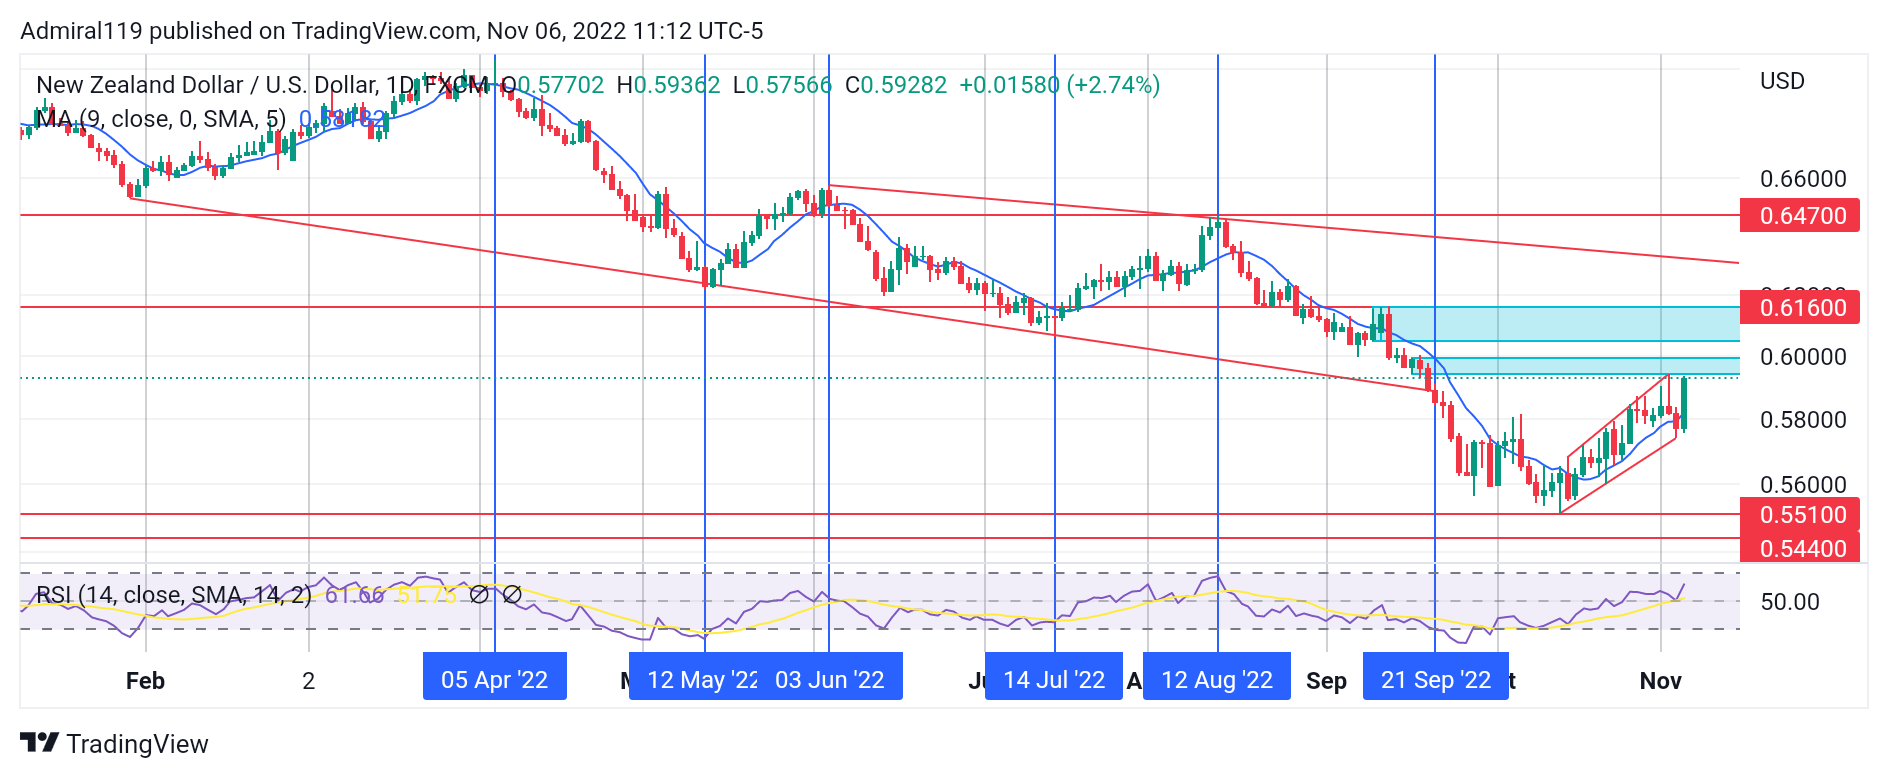 NZDUSD Begins an Uptrend Within an Ascending Channel